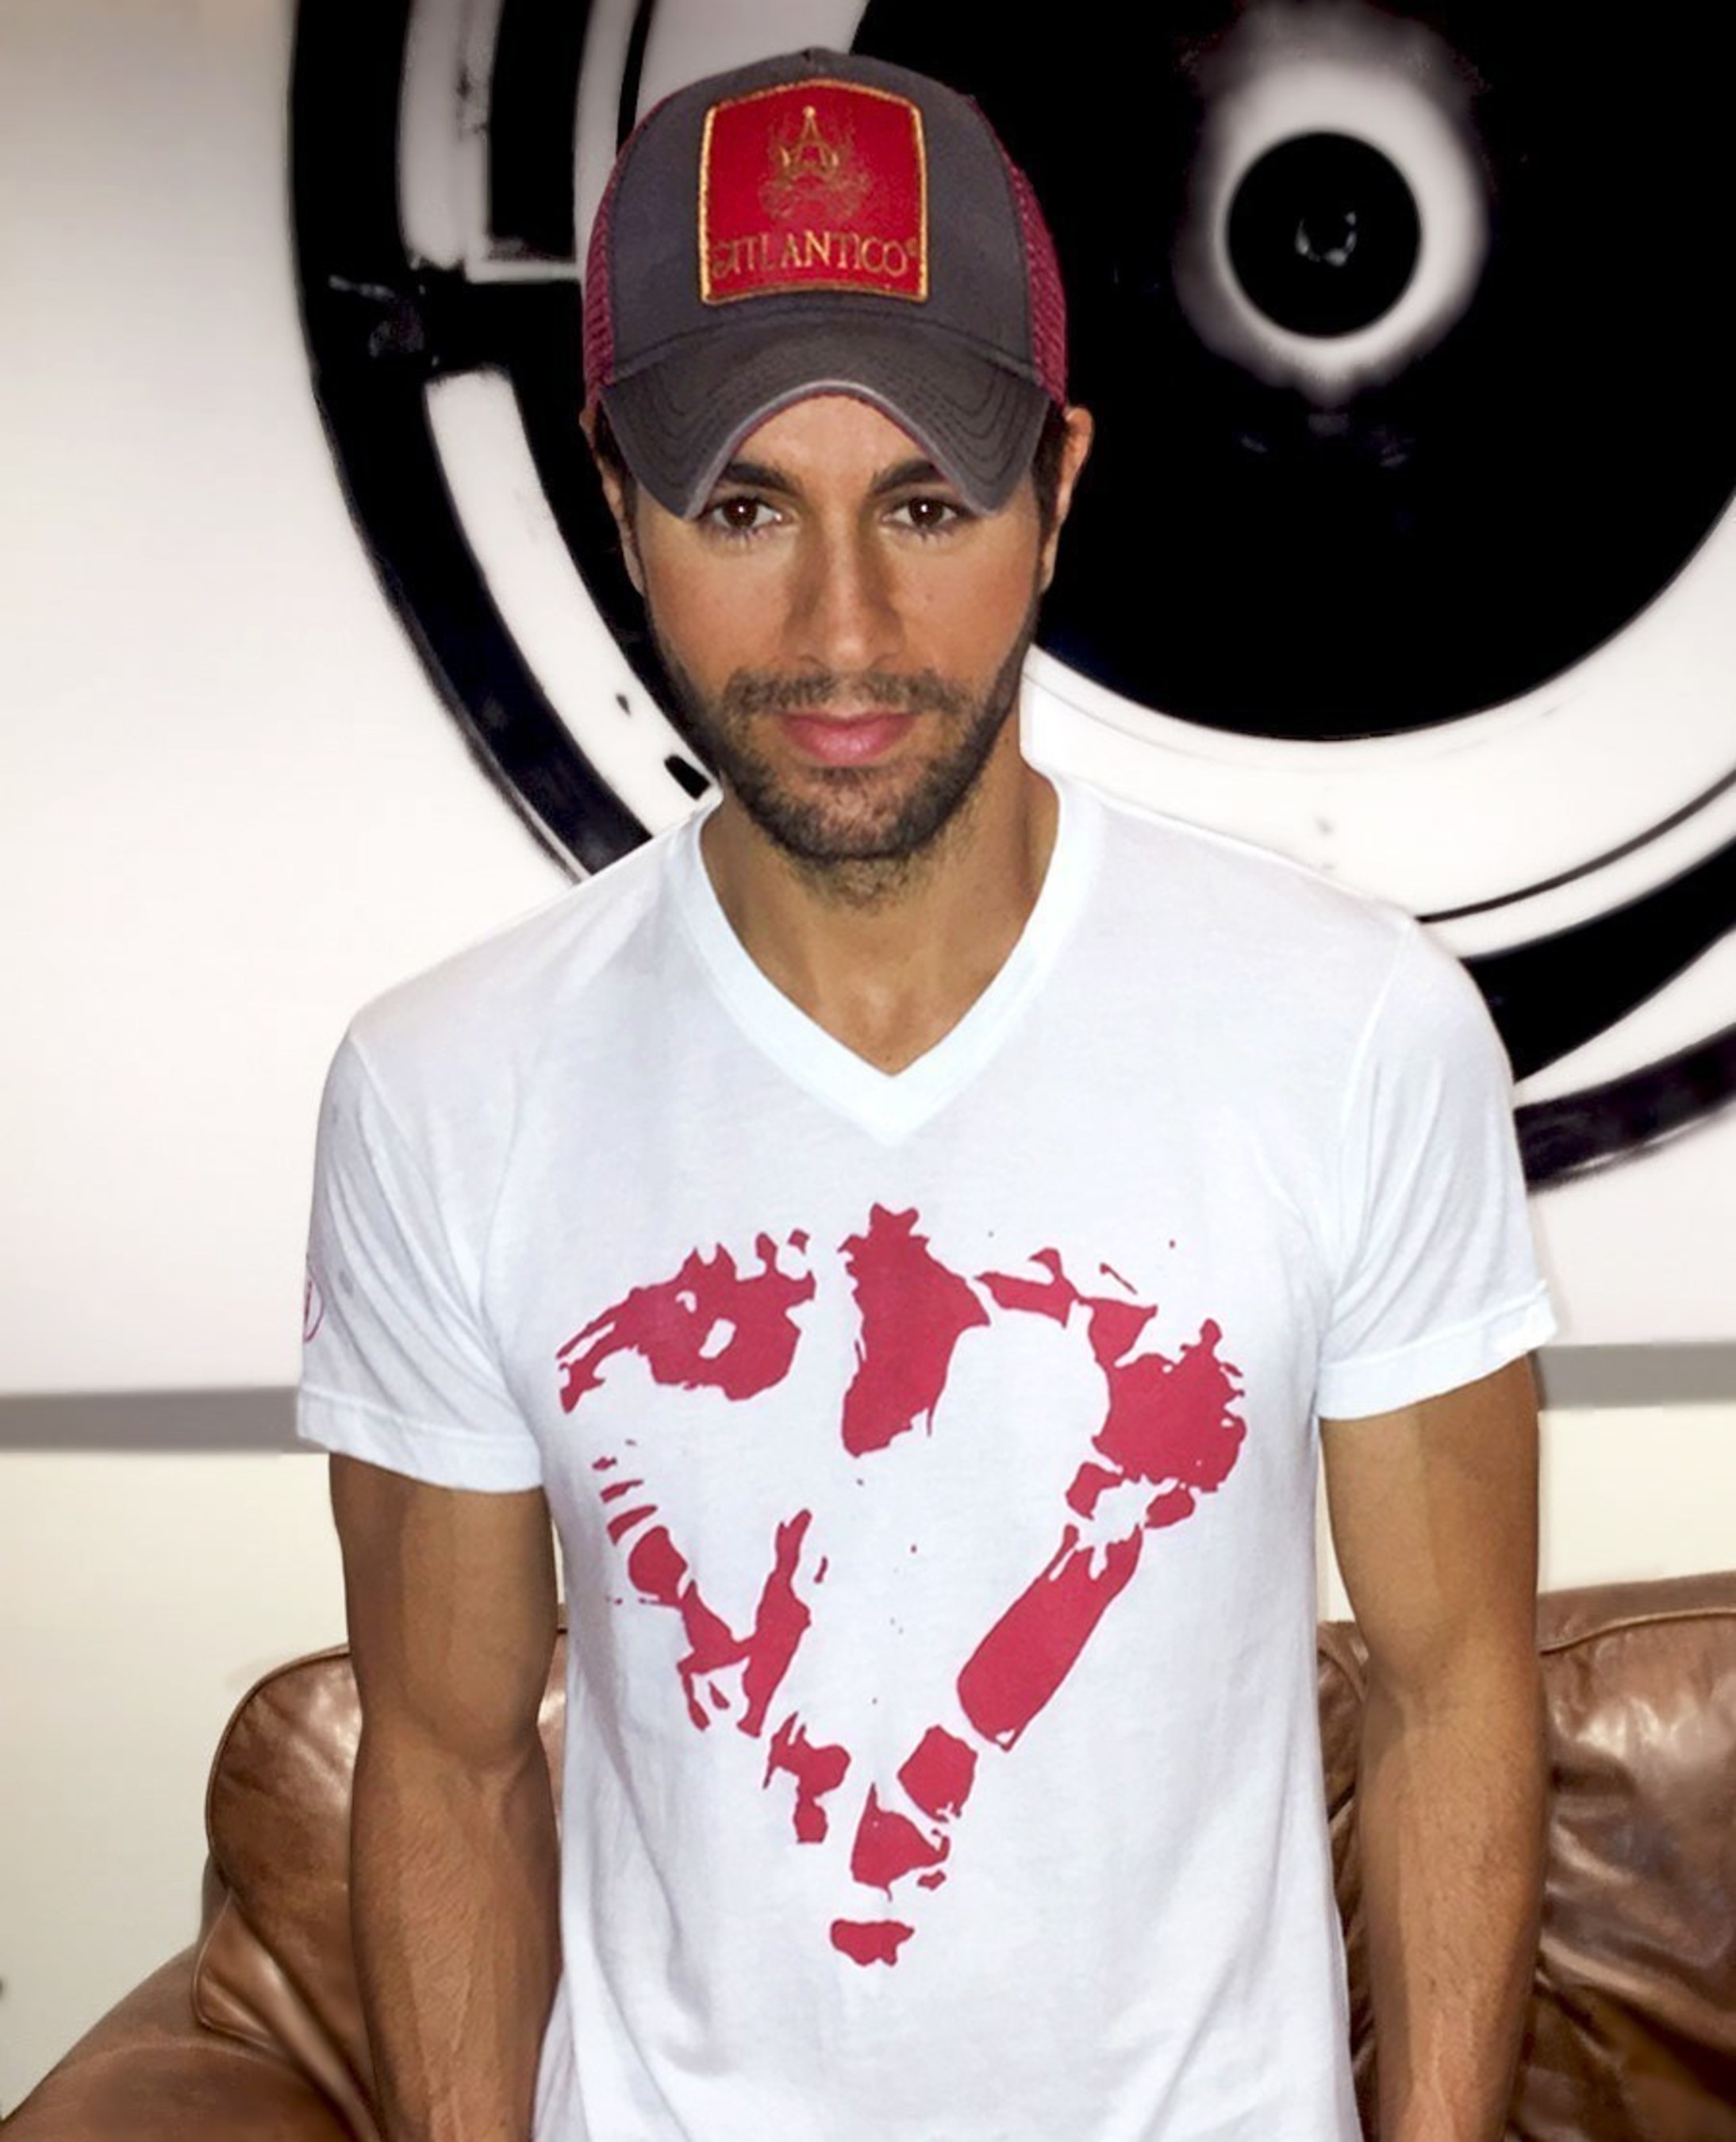 Enrique Iglesias sporting his new "heart" T-shirt.  All net proceeds from sales of the T-shirt will go to help kids in times of crises.  Photo by Al Silfen